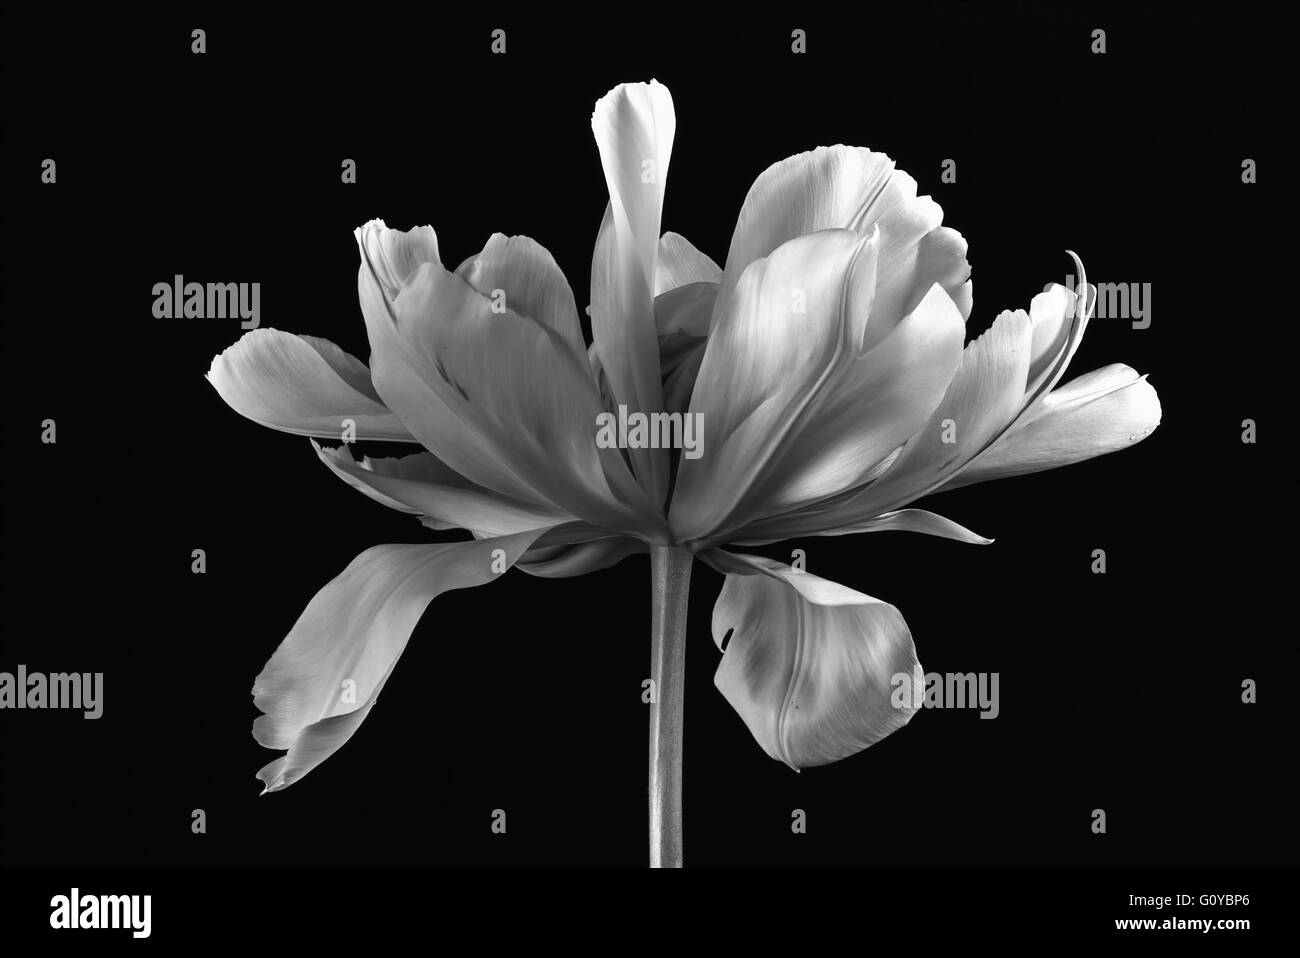 Tulip 'Exotic Emperor', Tulipa, Tulipa fosteriana 'Exotic Emperor', Beauty in Nature, Bulb, Contemporary, Cottage garden plant, Creative, Cut Out, Flower, Spring Flowering, Frost hardy, Monochrome, Plant, Studio shot, Black & white, Stock Photo